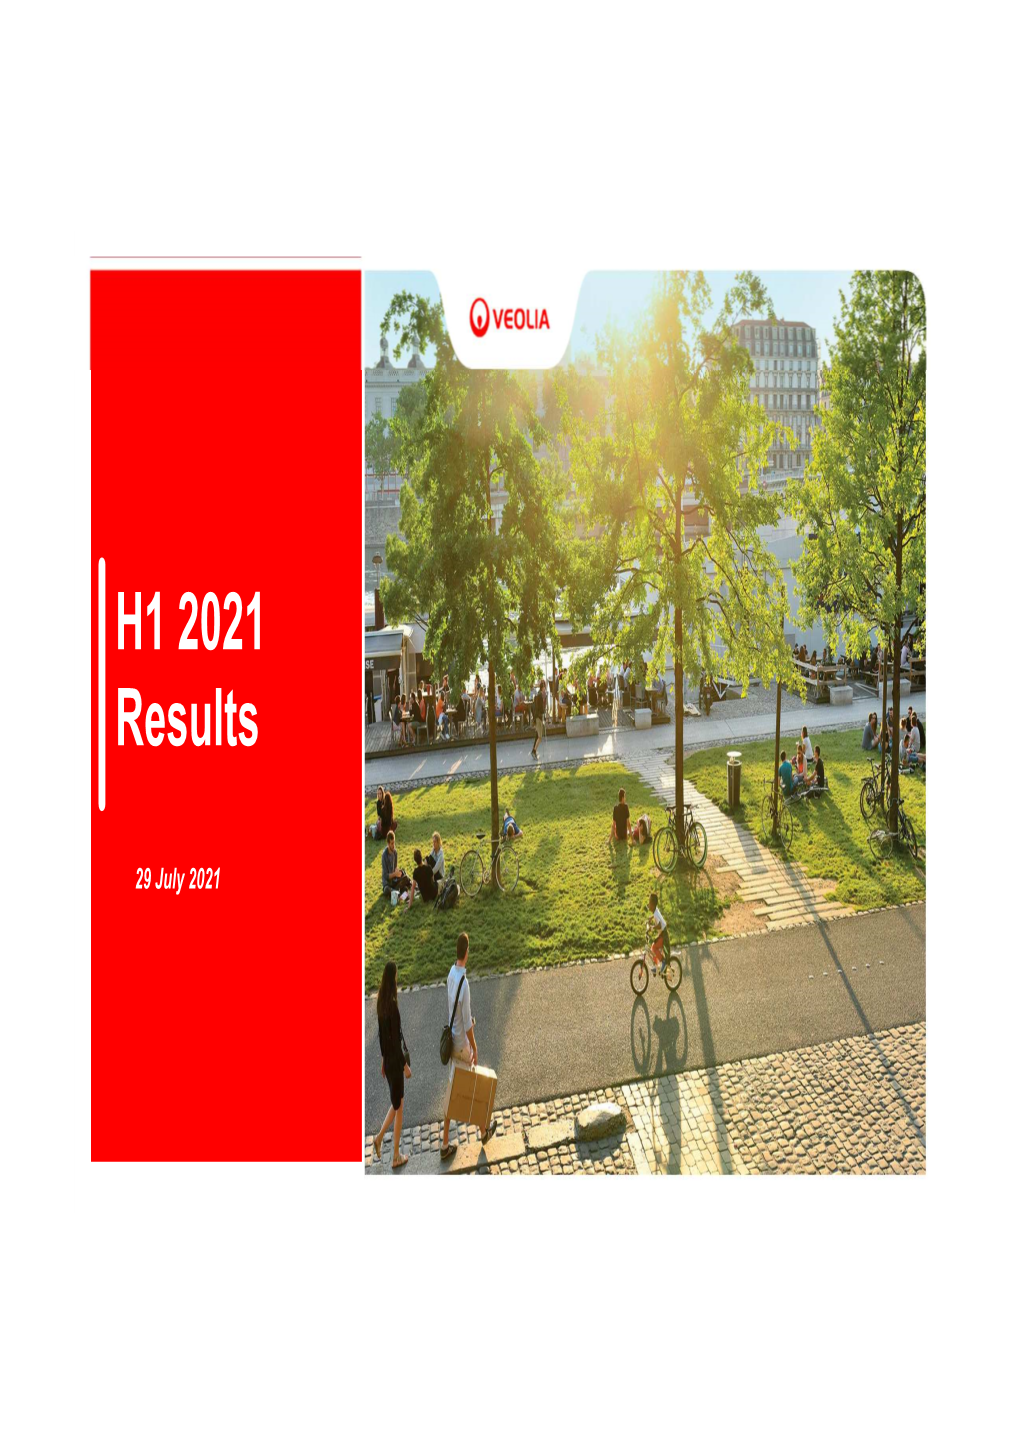 H1 2021 Results